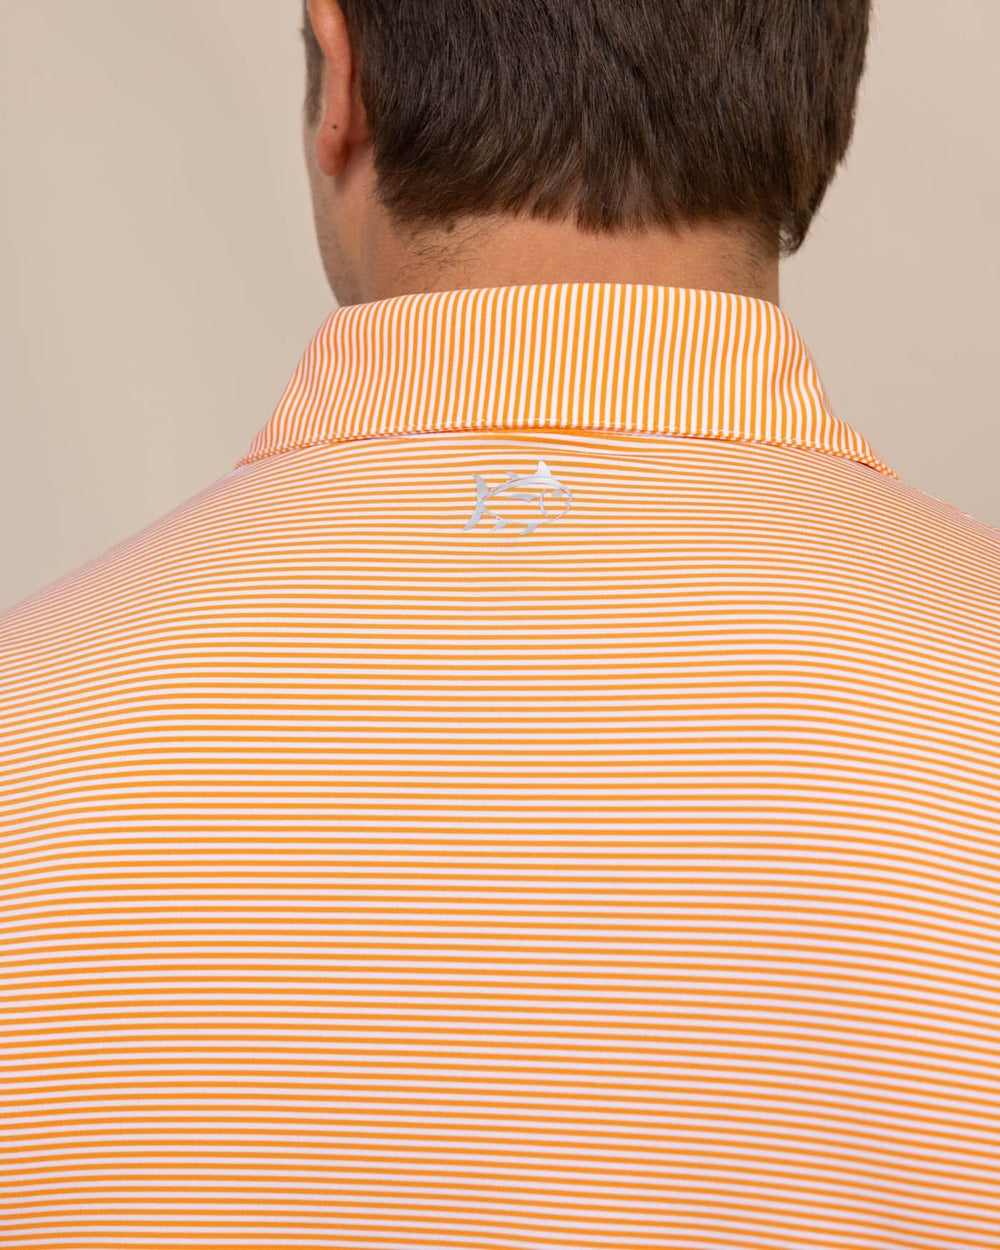 The detail view of the Southern Tide brrr-eeze-meadowbrook-stripe-polo by Southern Tide - Tangerine Orange